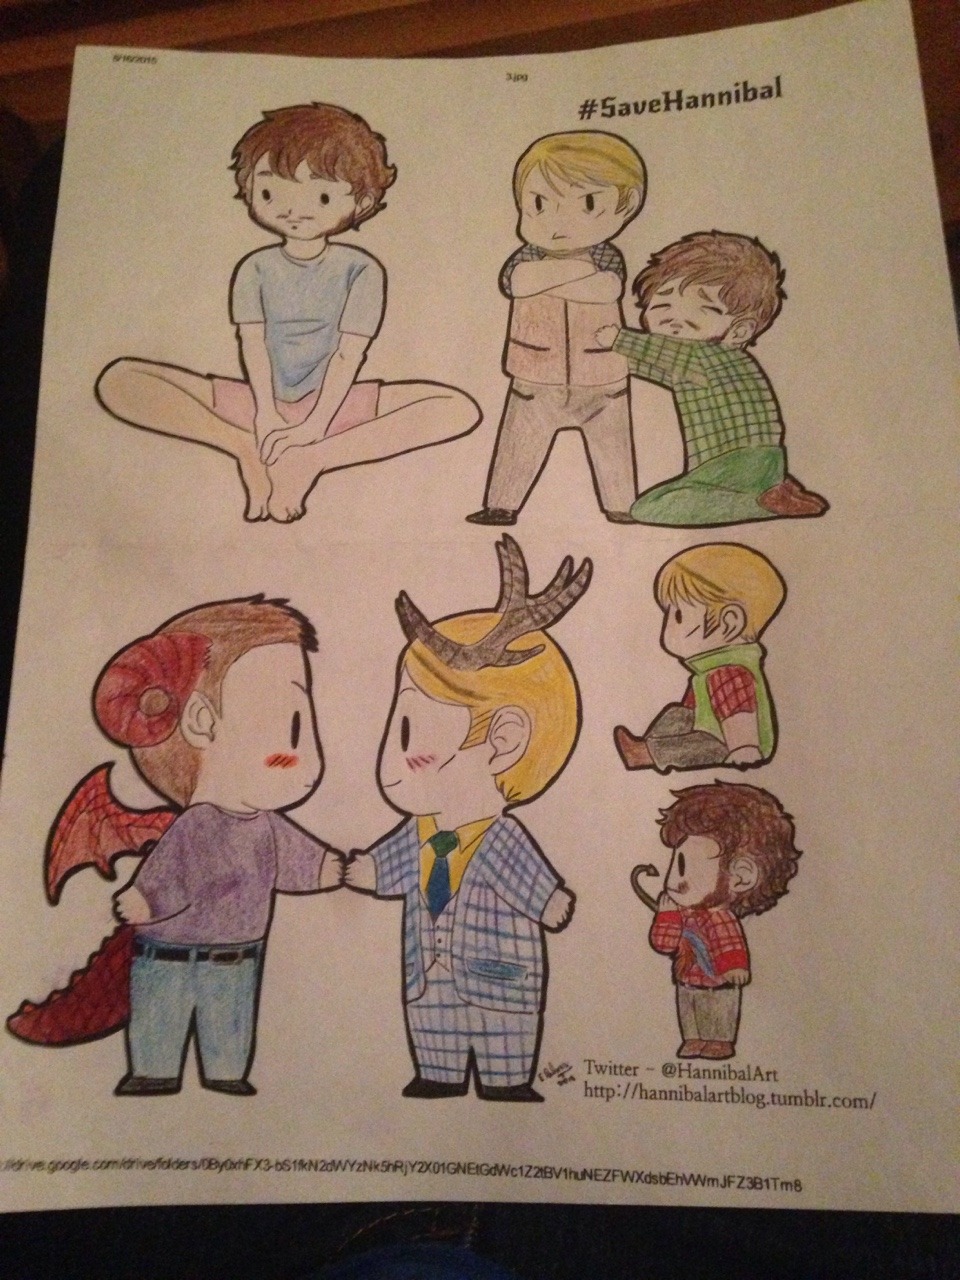 http://cupcakegeneral.tumblr.com/post/126882933659/my-attempt-at-coloring-for-the-fannibal-coloring